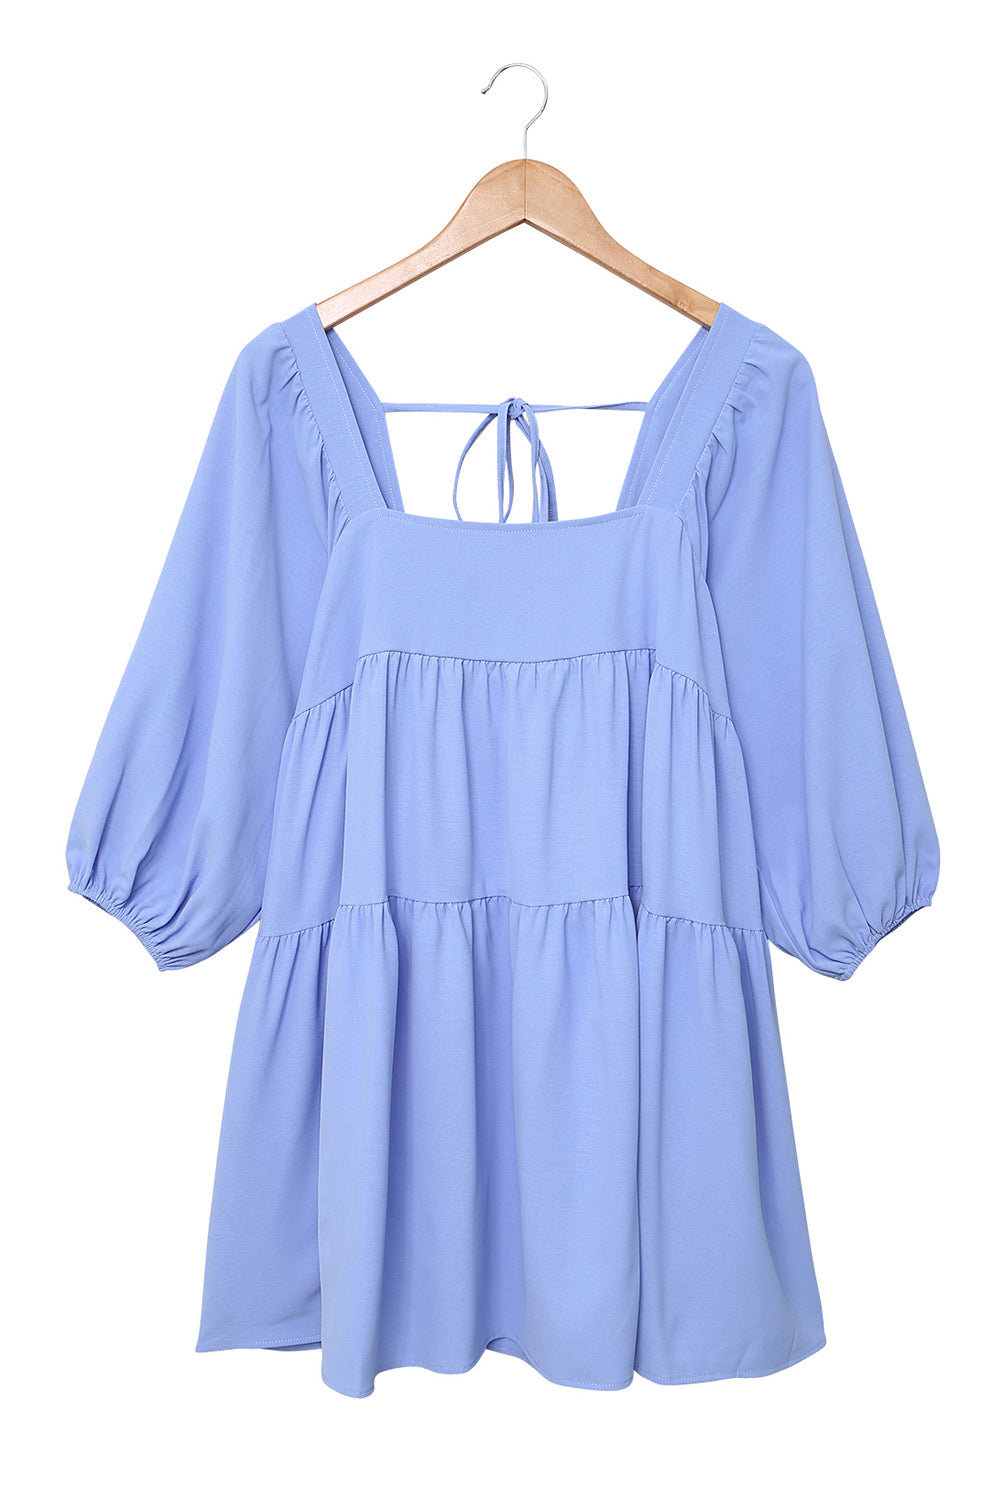 Light Blue Square Neck Lace Up Tiered Short Dress